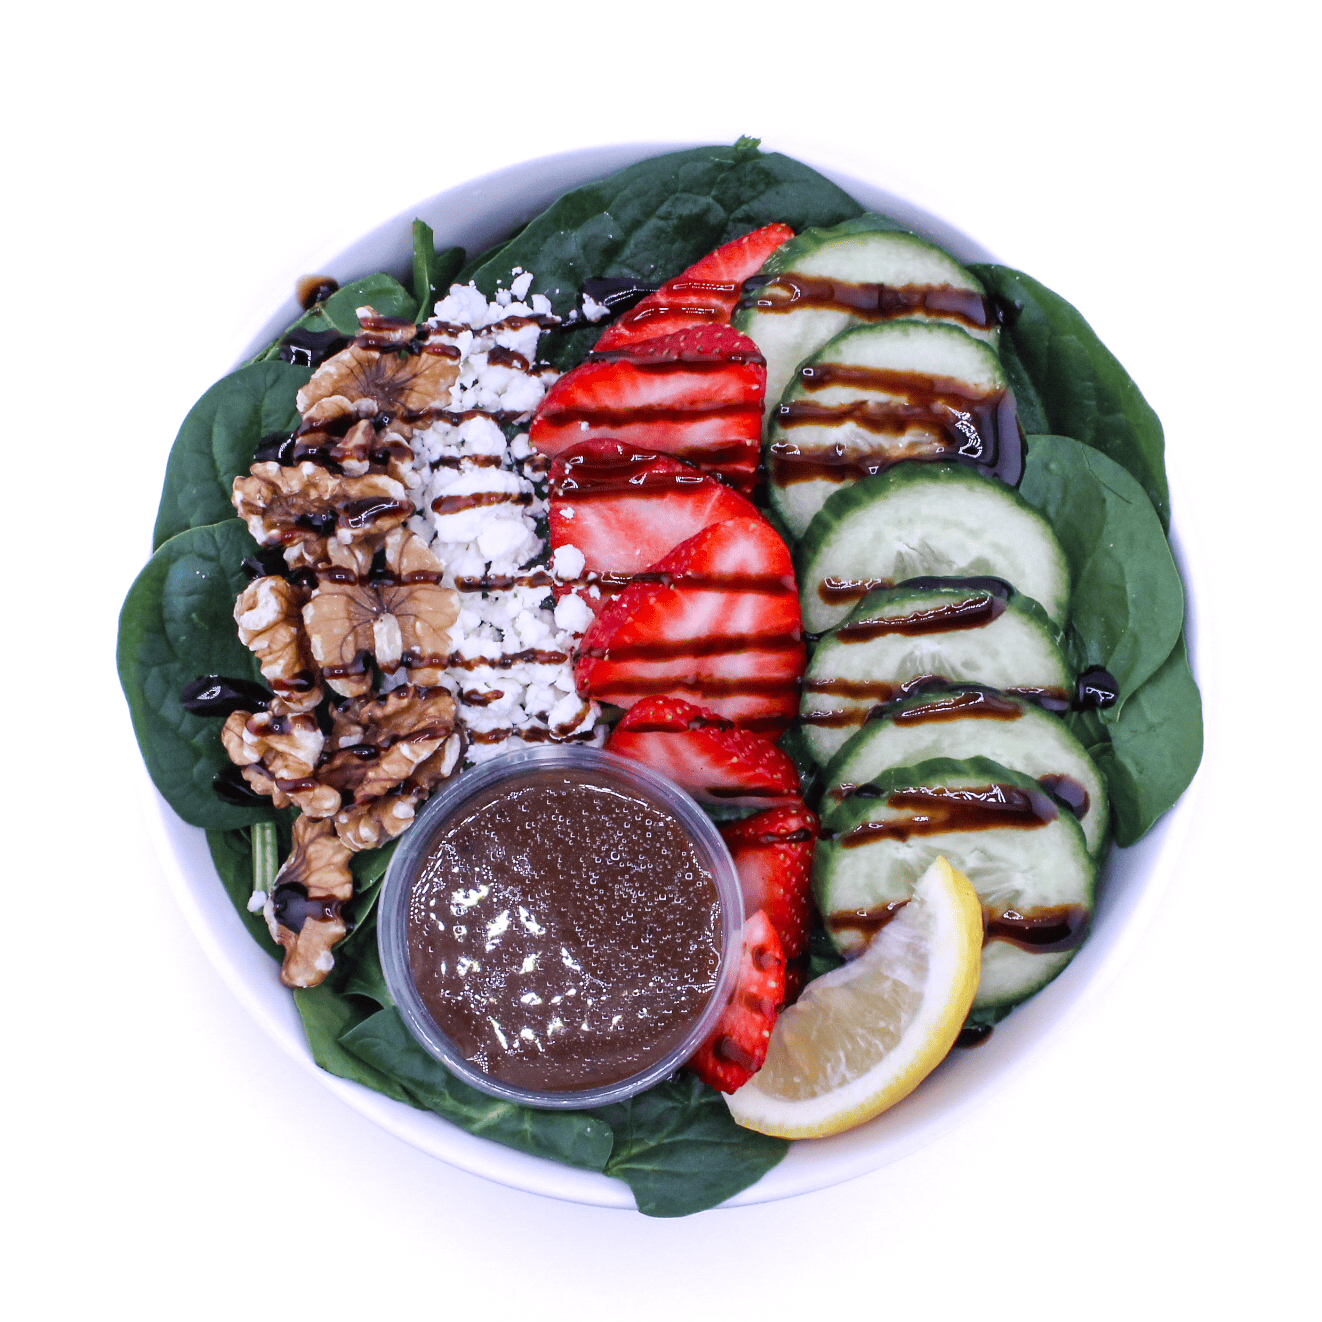 Strawberry Fields -  Spinach, cucumbers, goat cheese, walnuts, strawberry slices, balsamic reduction, balsamic vinaigrette - Vegetarian, Contains Nuts, Gluten Free 